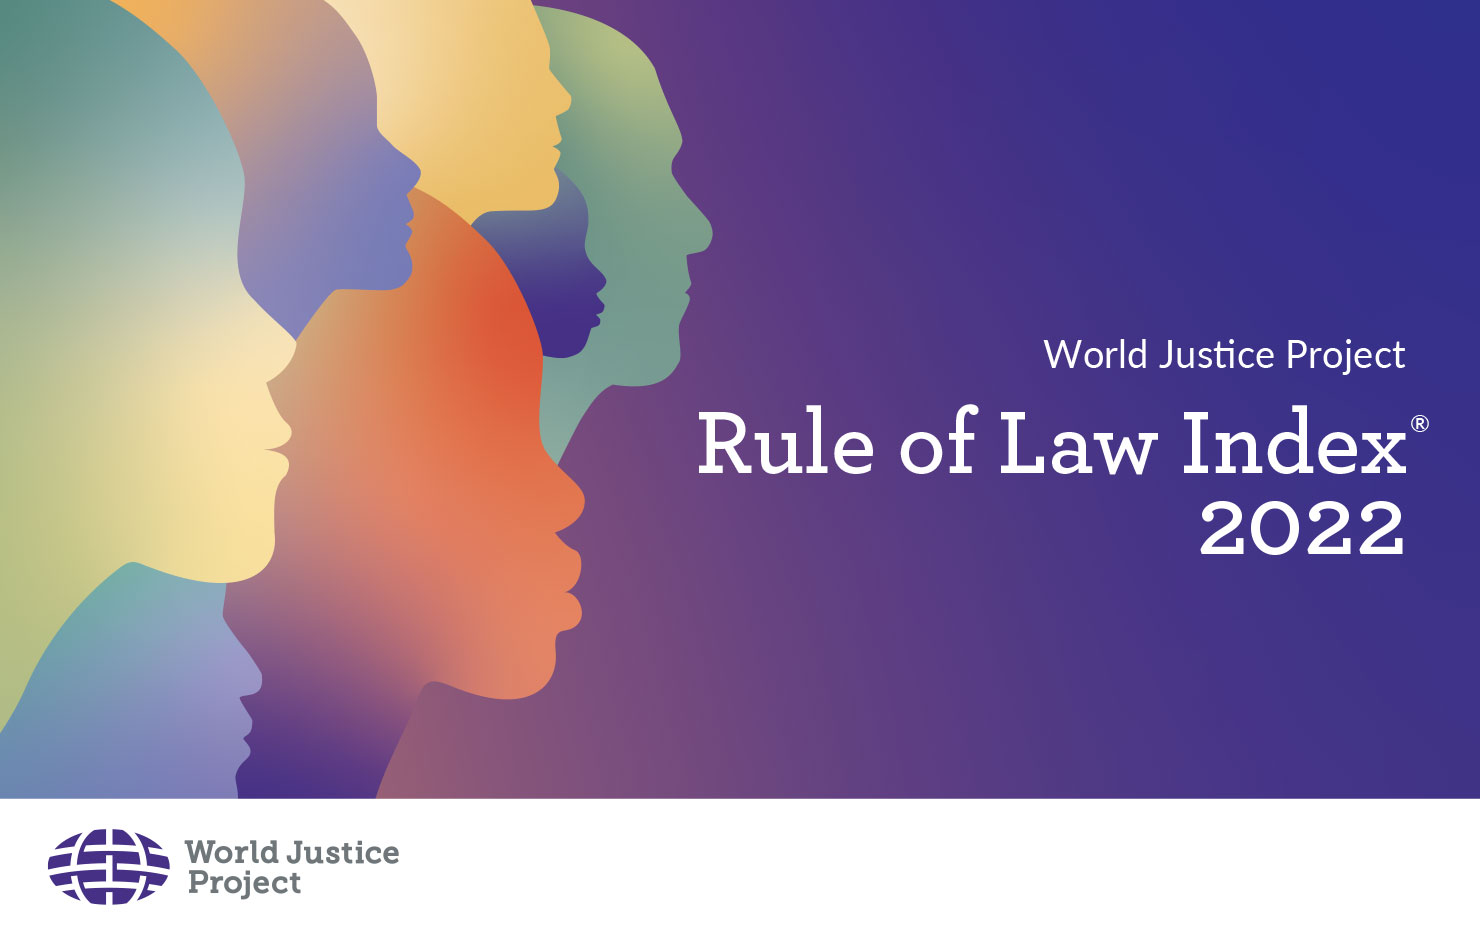 The 2022 edition of the WJP Rule of Law Index